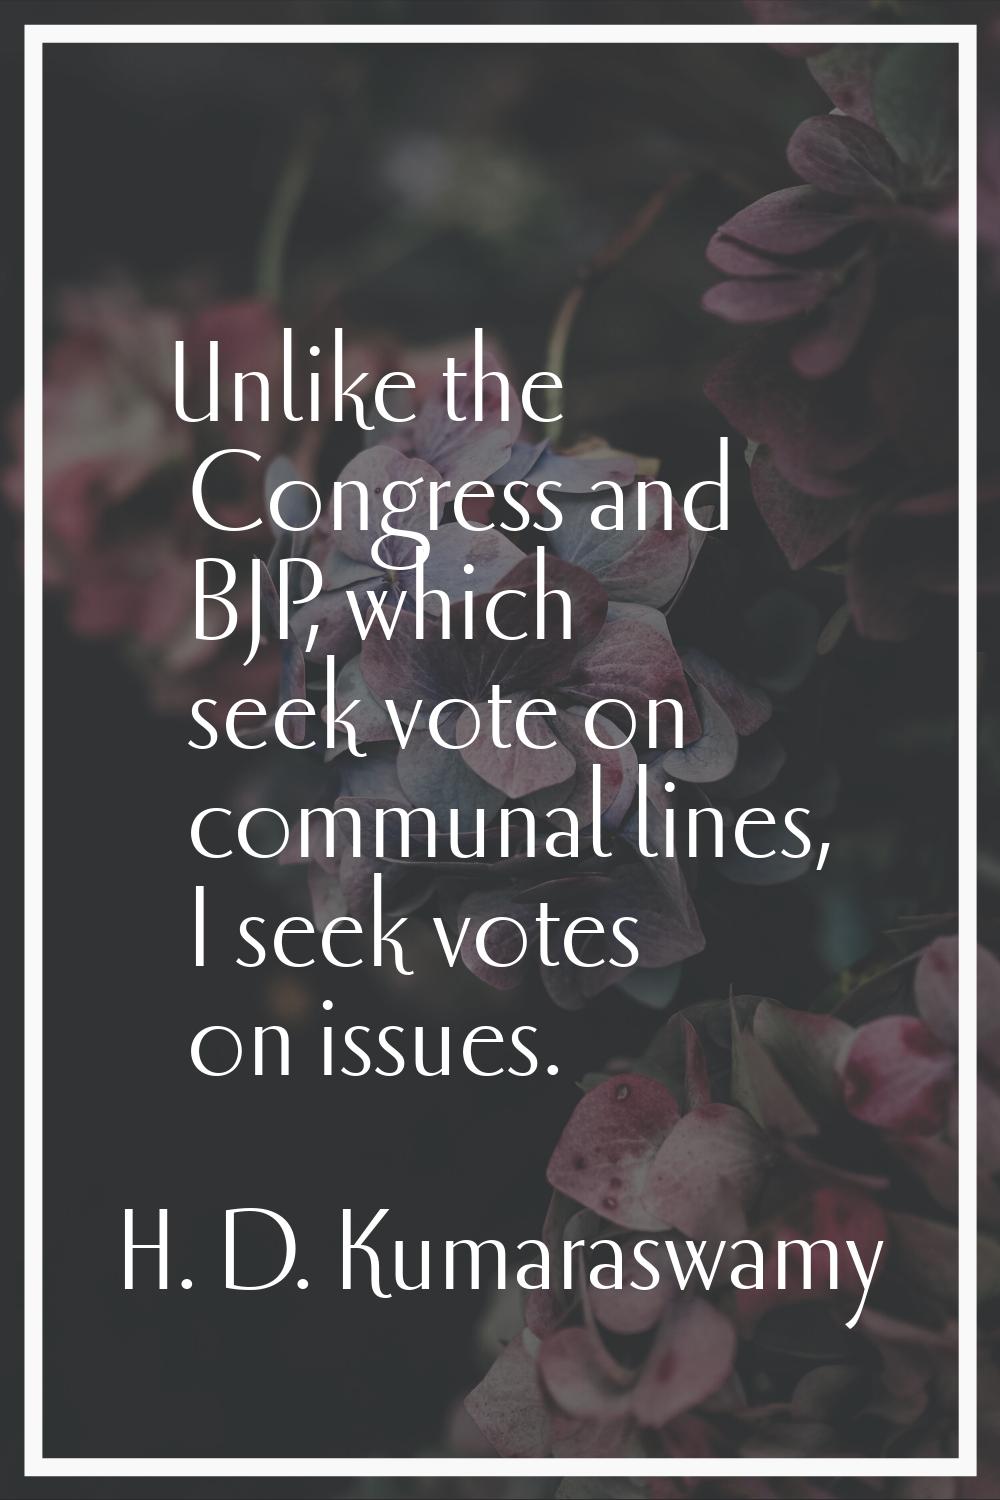 Unlike the Congress and BJP, which seek vote on communal lines, I seek votes on issues.